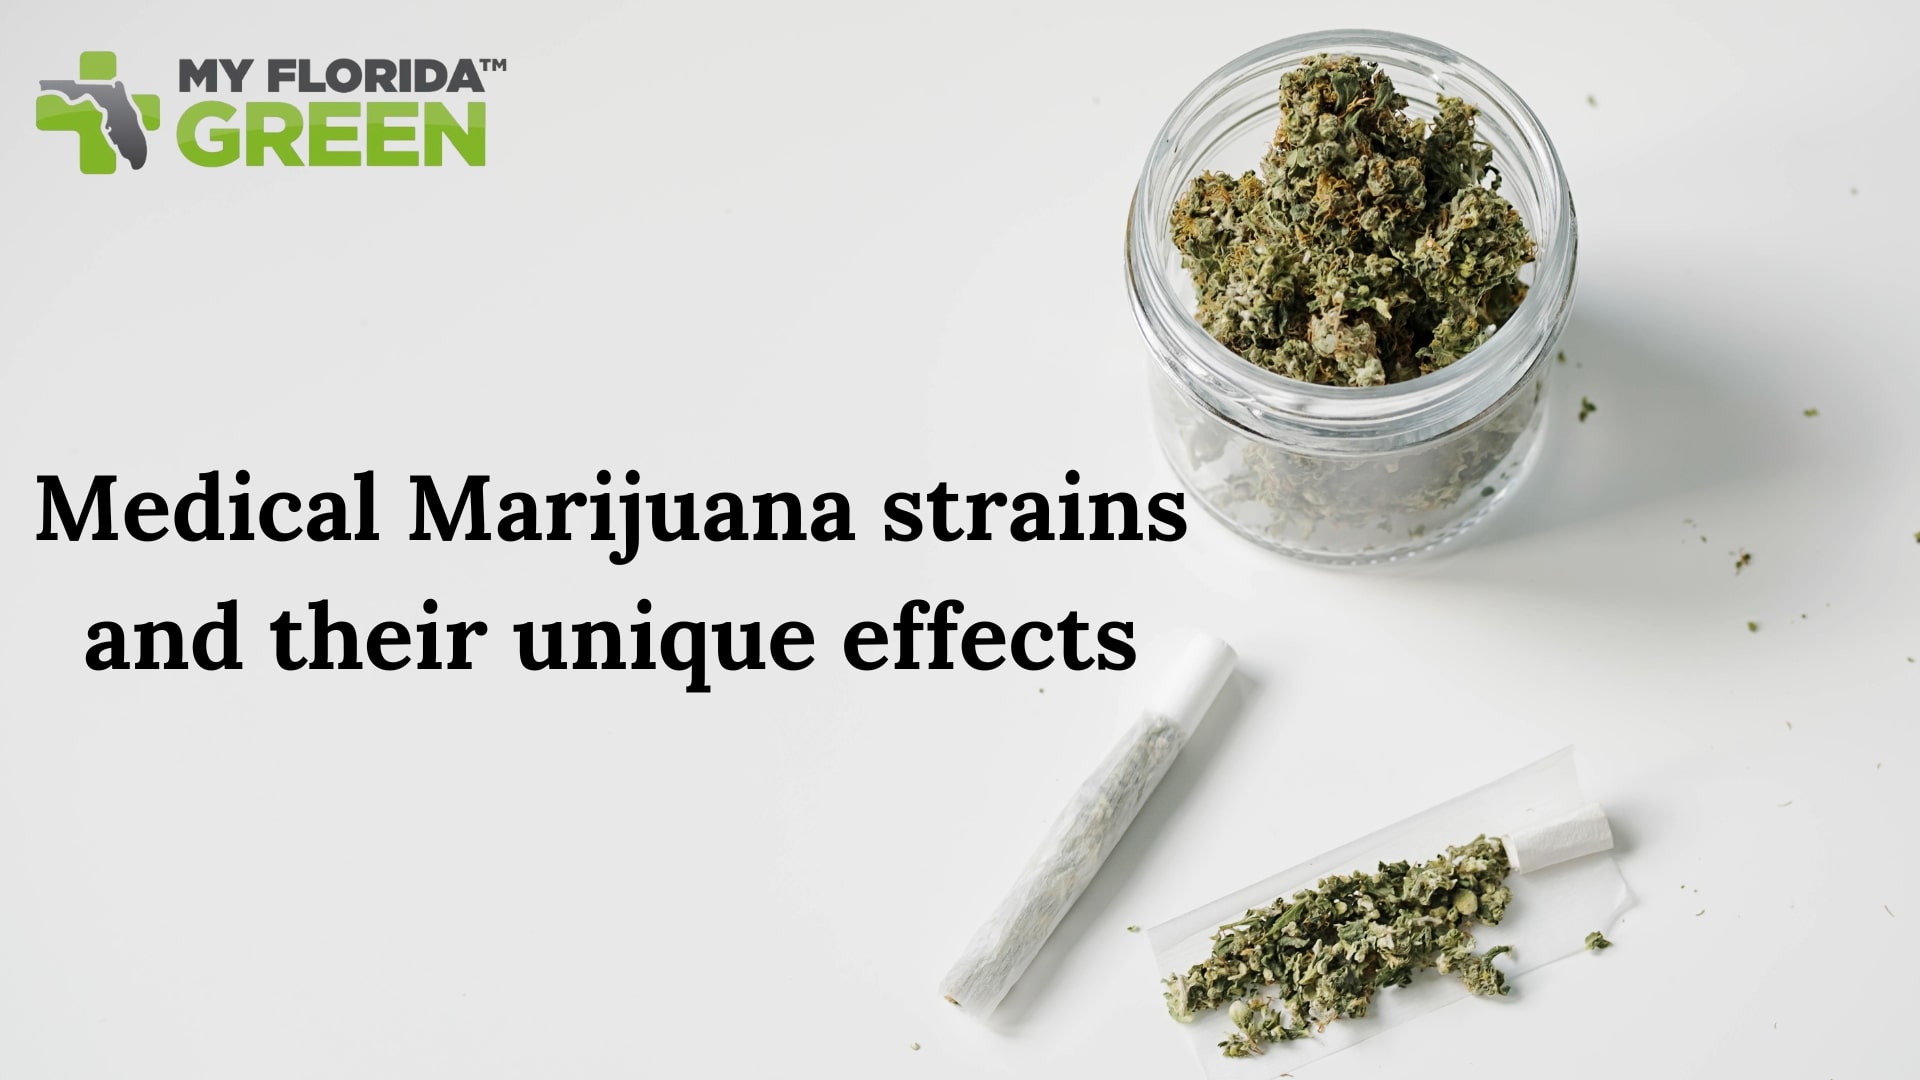 Medical Marijuana strains and their unique effects